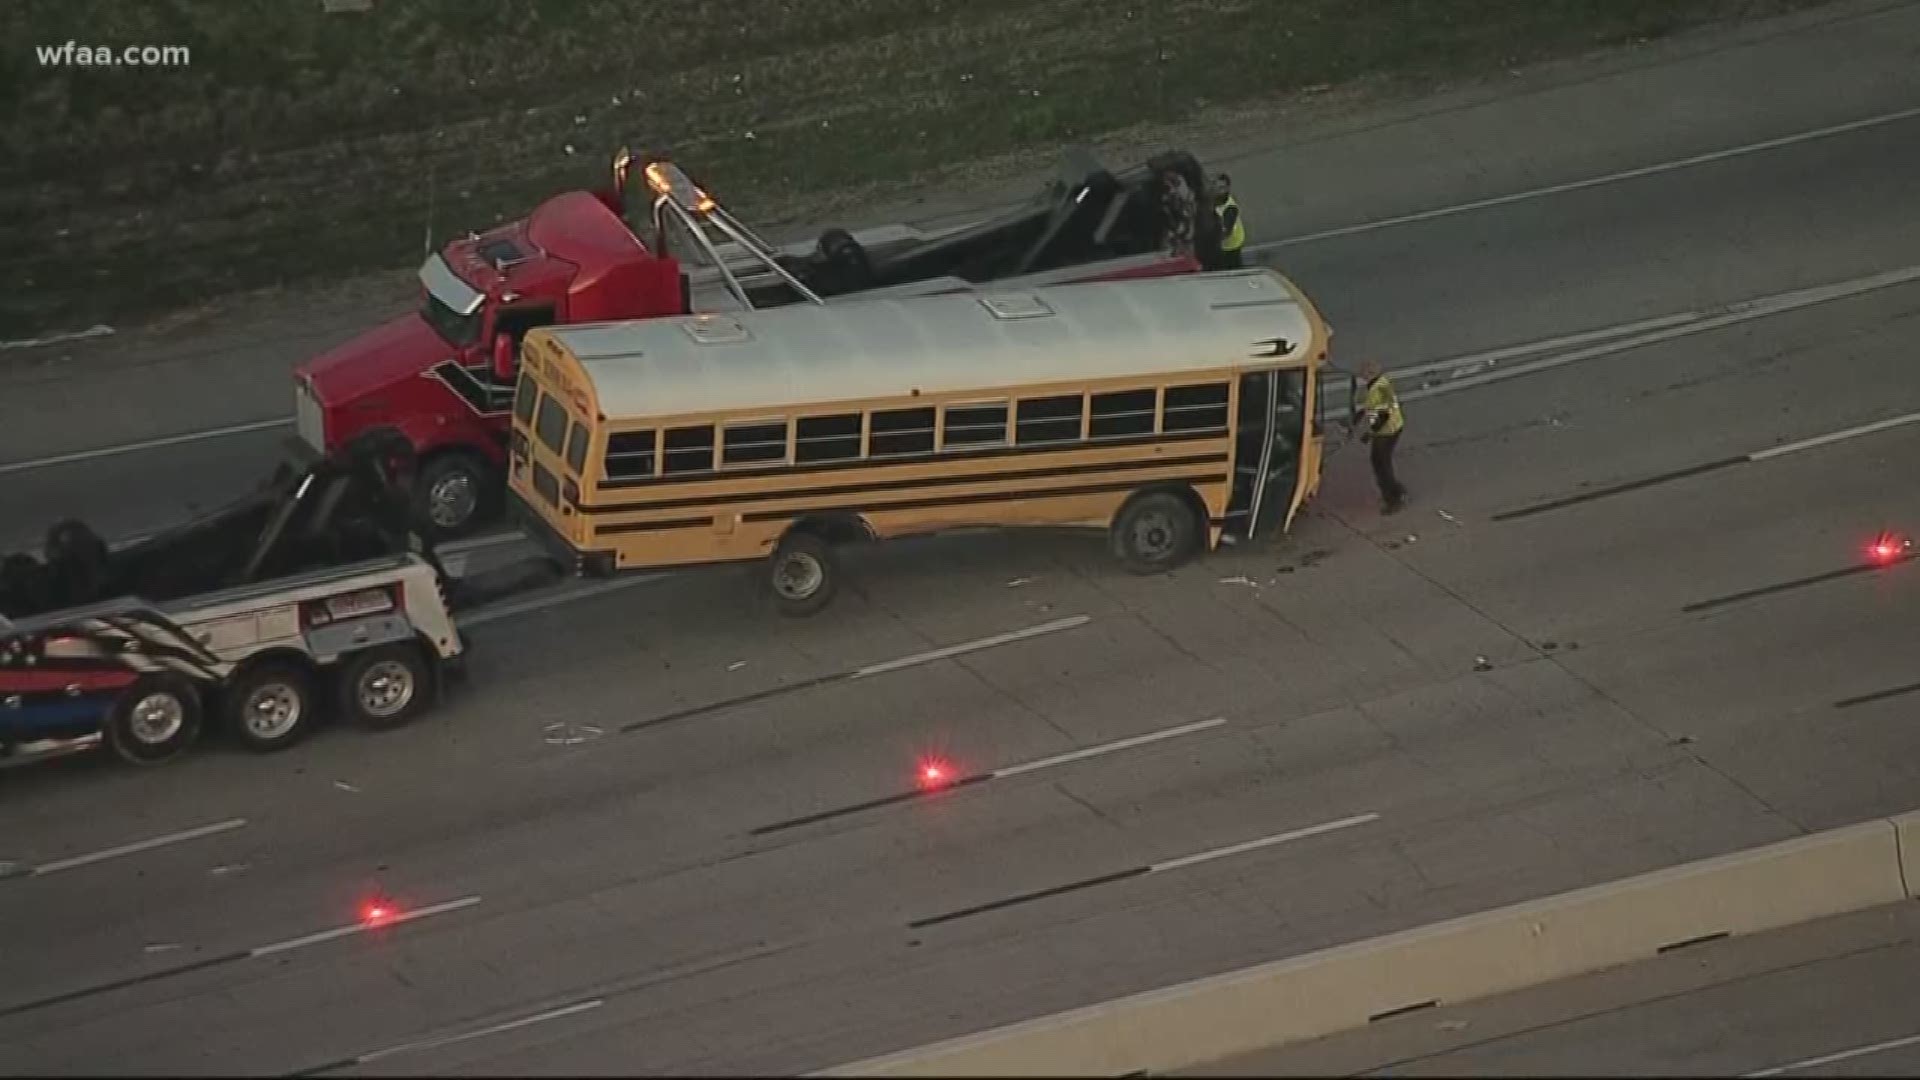 Nine students and bus driver injured in crash